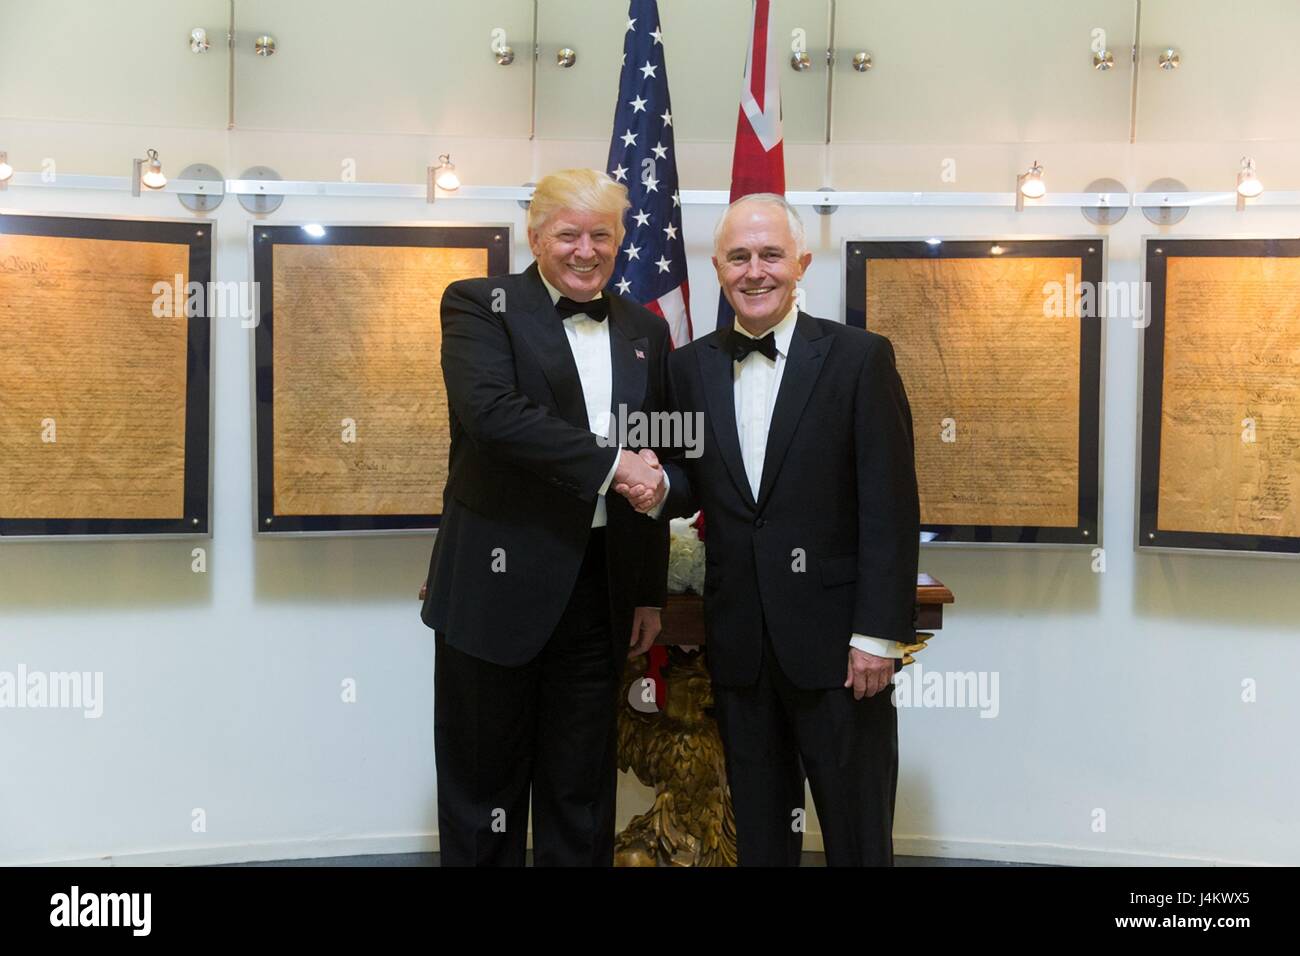 U.S. President Donald Trump greets Australian Prime Minister Malcom Turnbull before a bilateral meeting aboard the Intrepid Sea, Air & Space Museum May 4, 2017 in New York City. The two leaders attended a dinner to honor the 75th anniversary of the victory of the United States and Australia over Japan in the Battle of the Coral Sea during World War II. Stock Photo